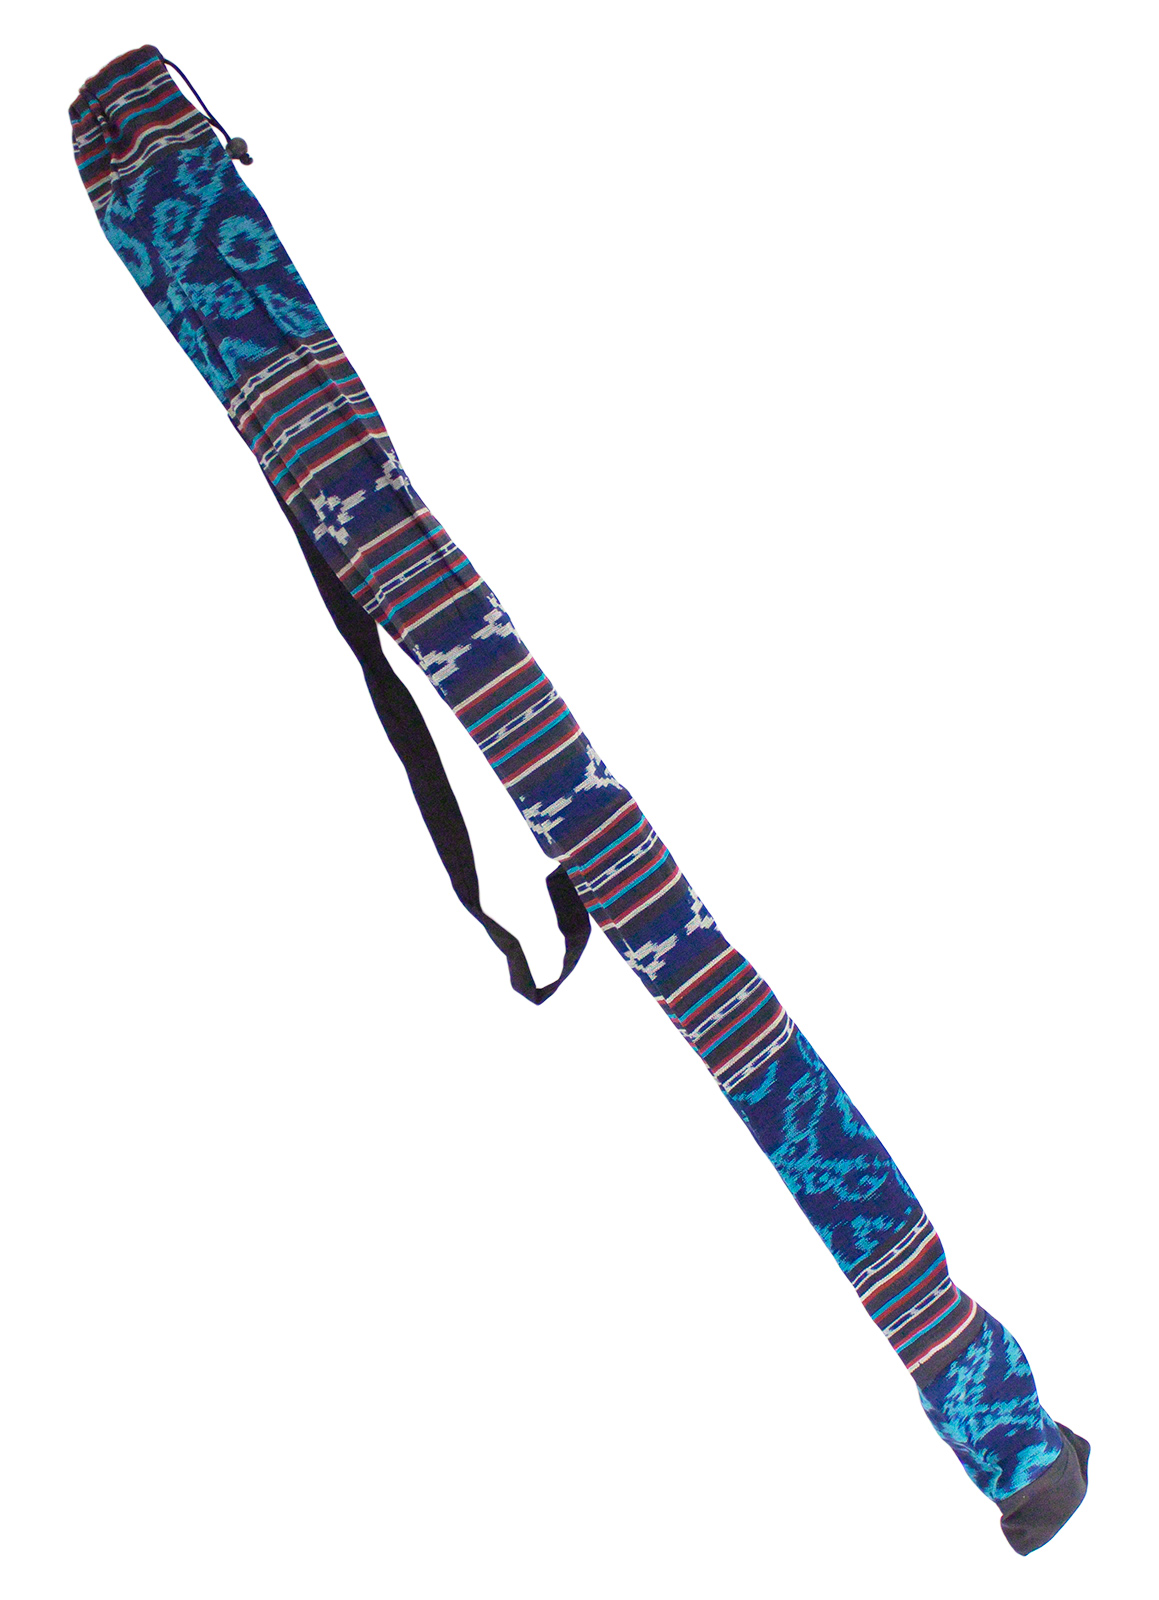 ROOTS PERCUSSION DIDGERIDOO FABRIC PROTECTION BAG 130CM